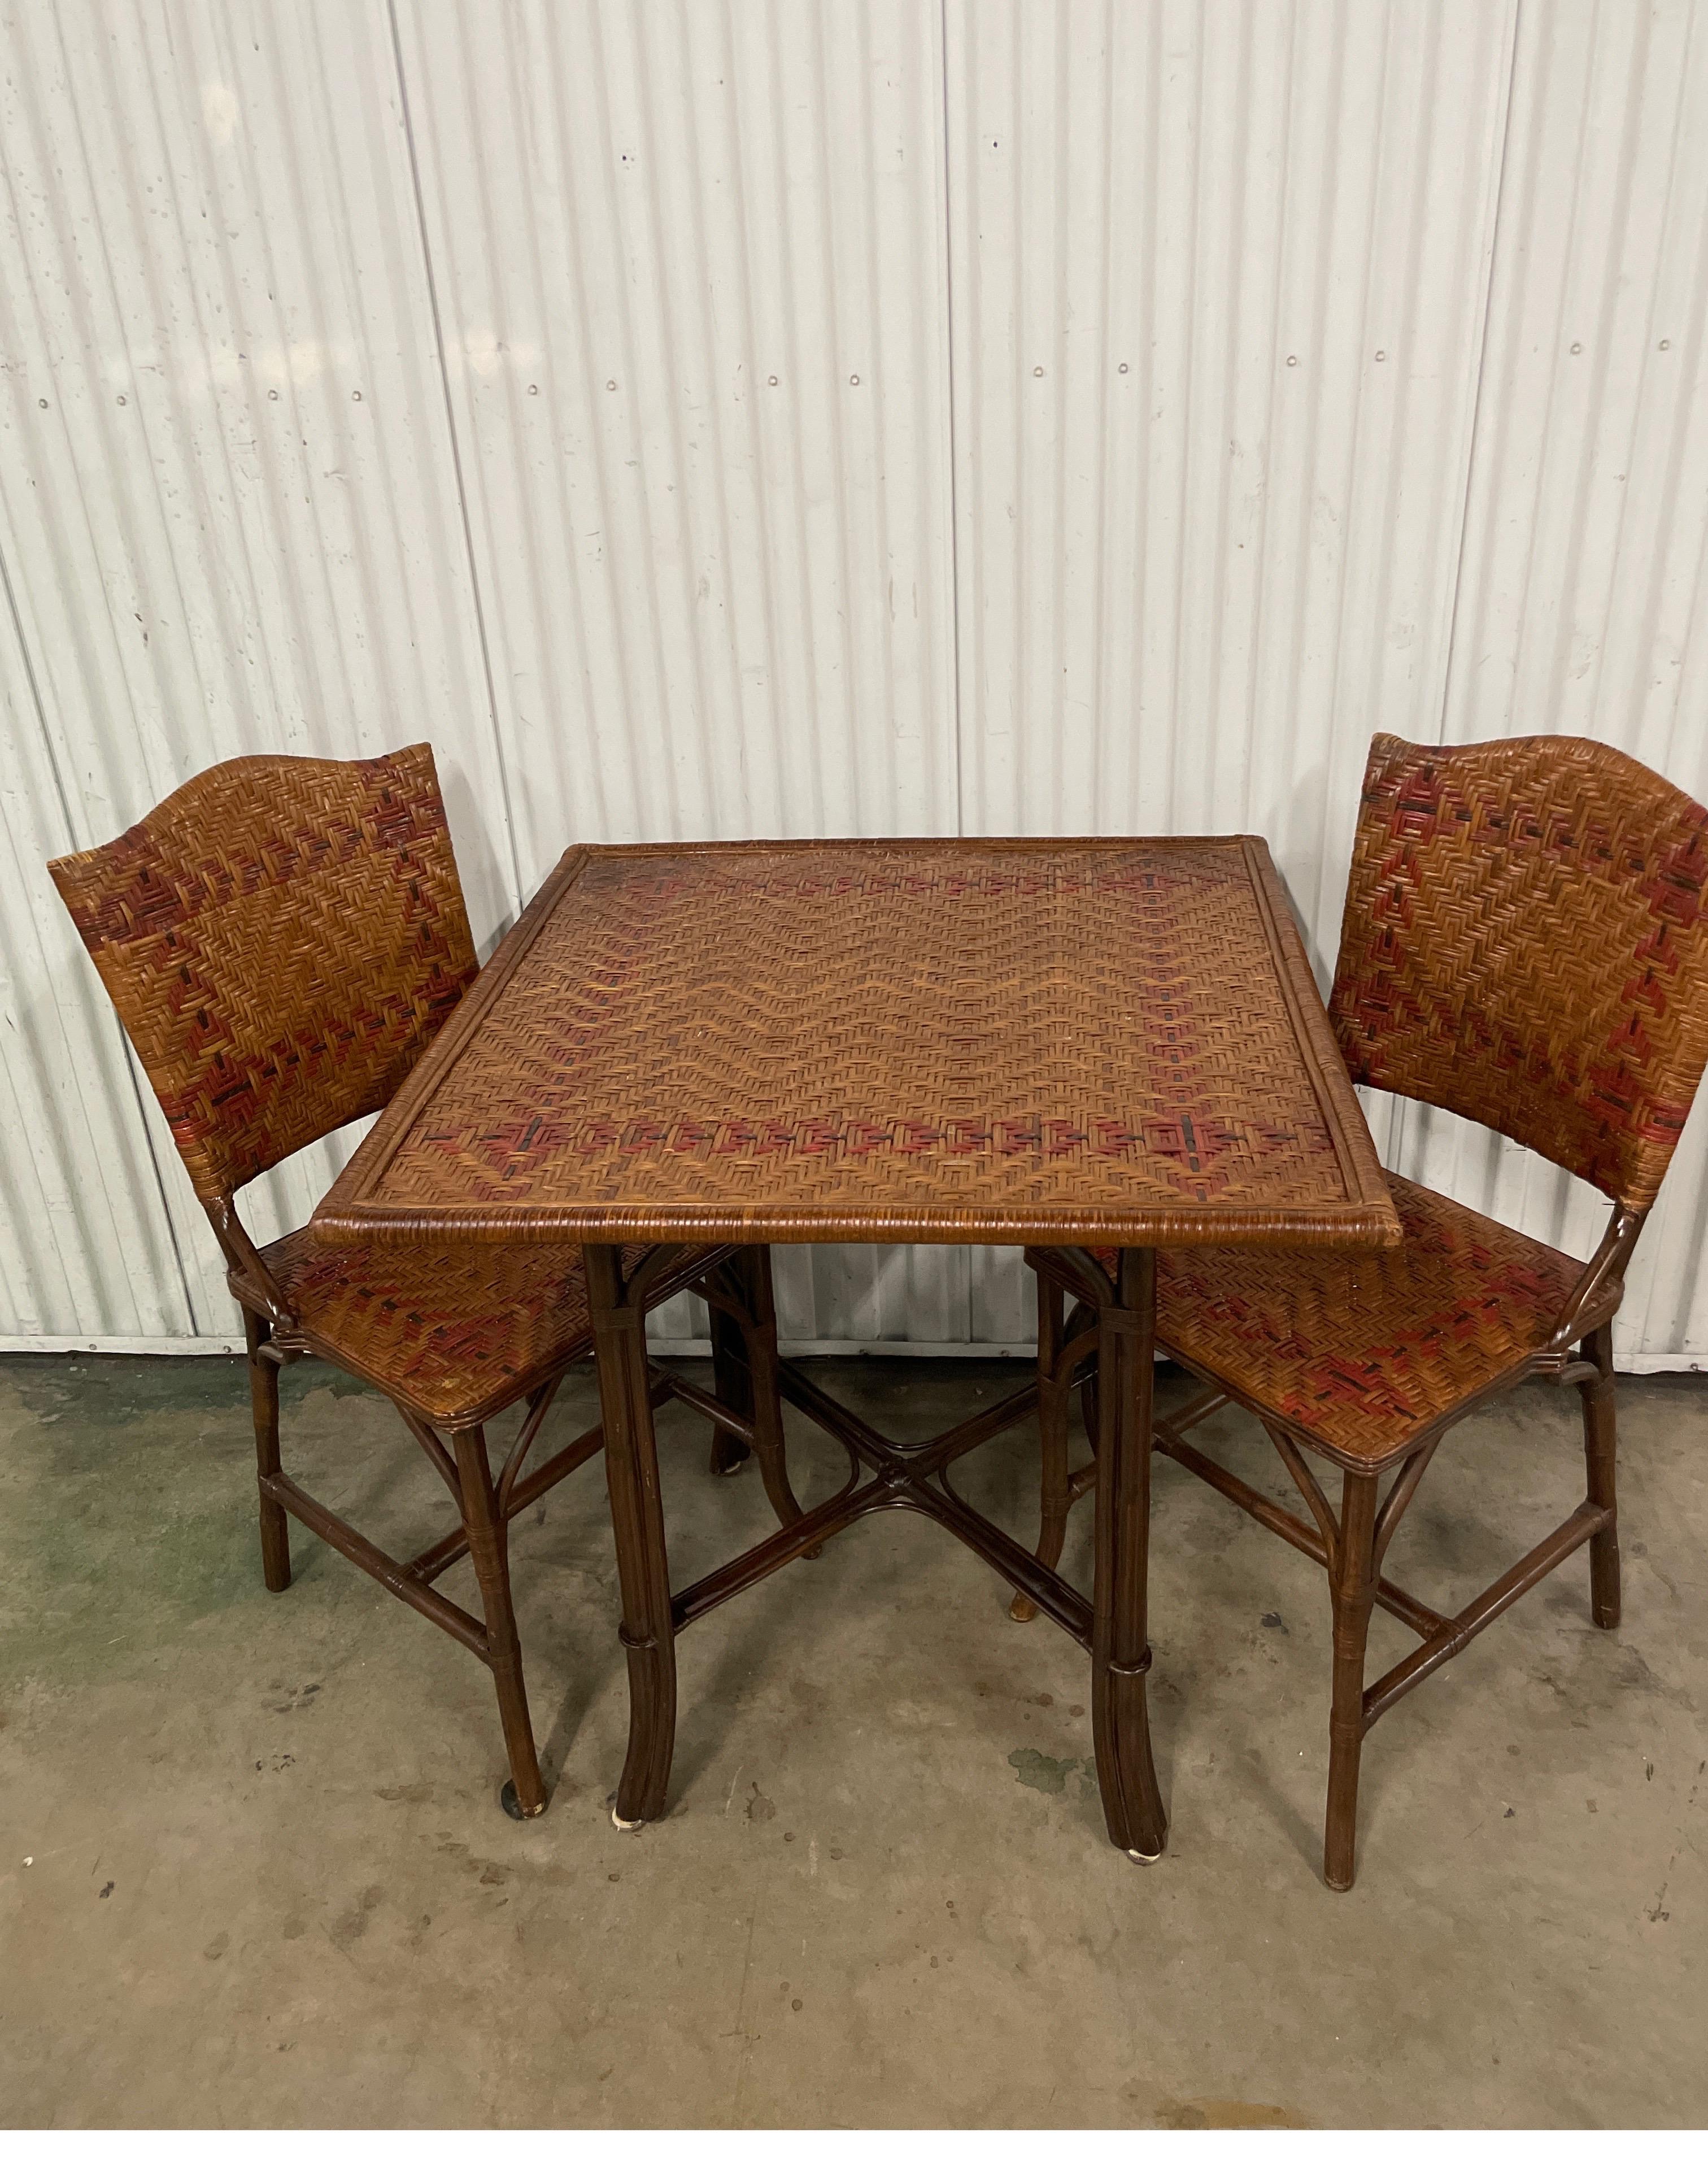 Vintage mid century woven bamboo table and two matching chairs. The chairs are 16